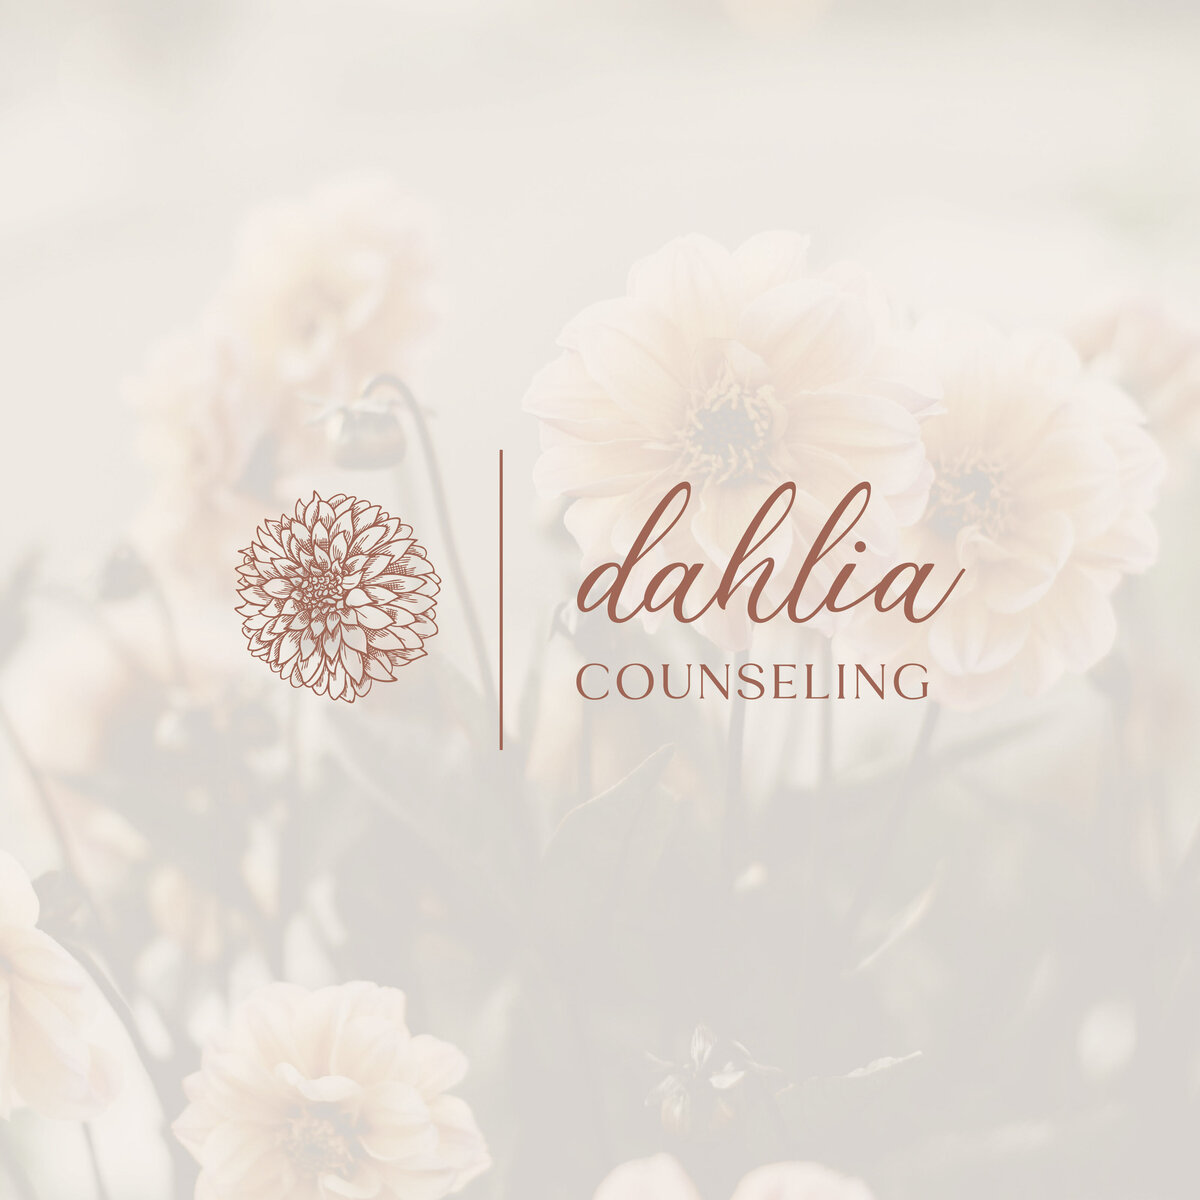 Dahlia Counseling primary logo on a soft white background